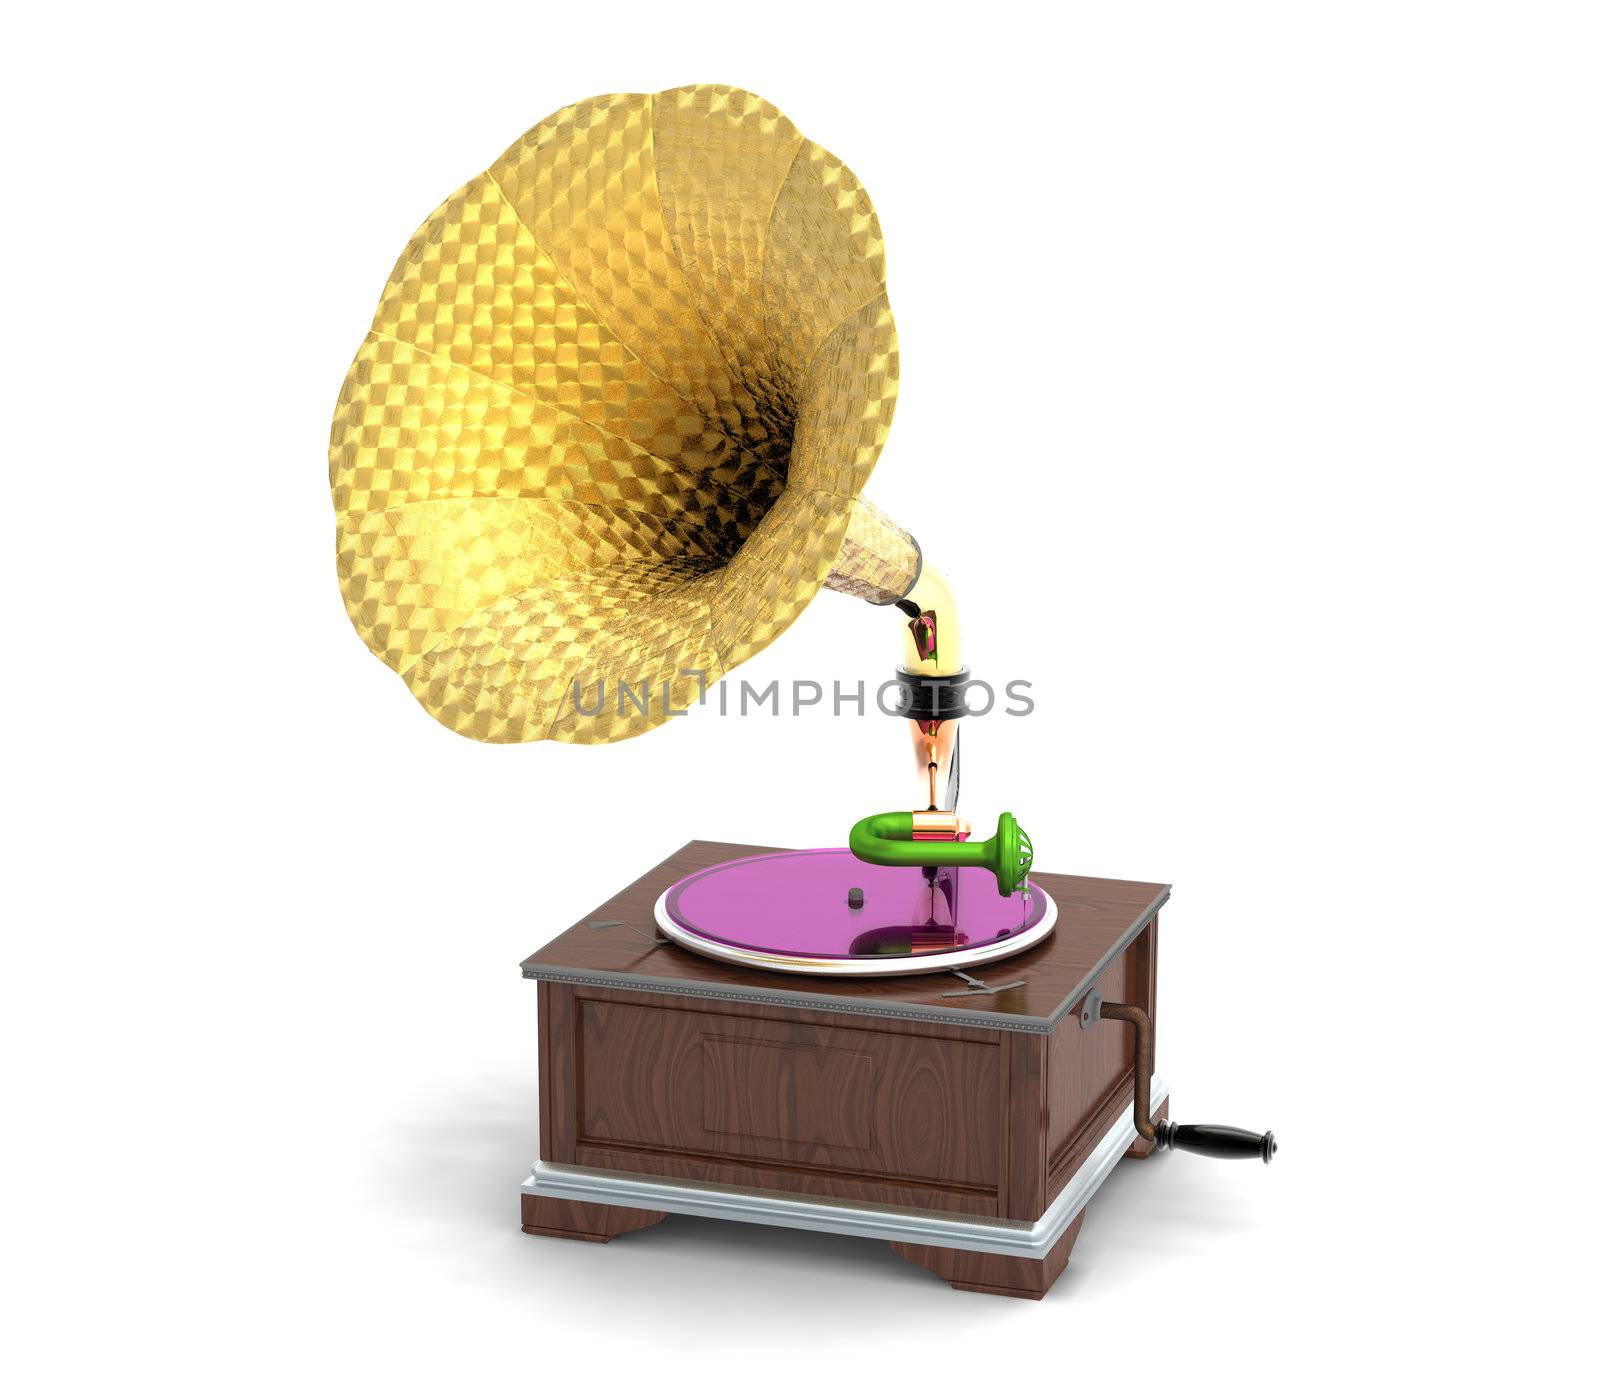 Vintage gramophone isolated